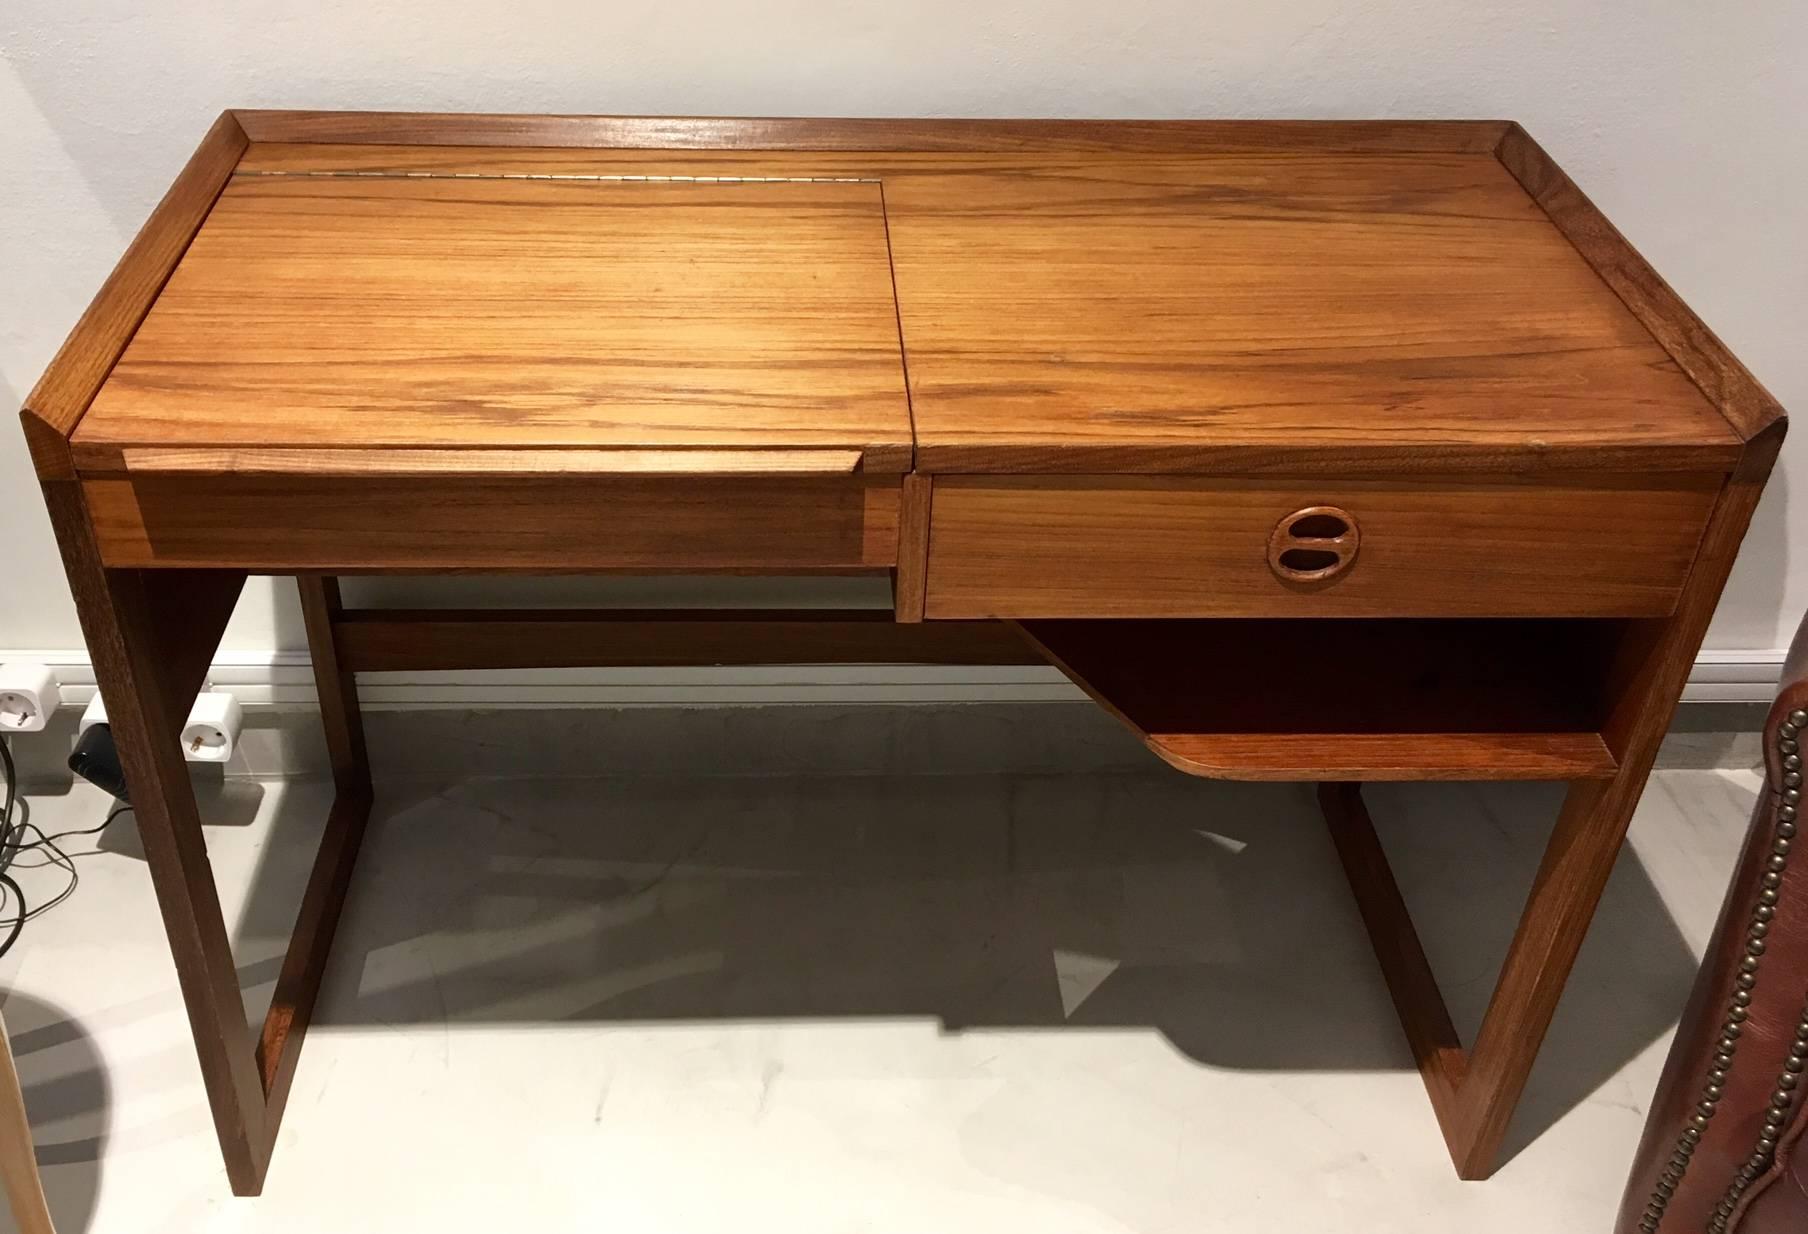 Mid-Century teak desk/dressing table. One side of the tabletop reveals a mirror and small compartments when lifted up. Other side with a drawer.